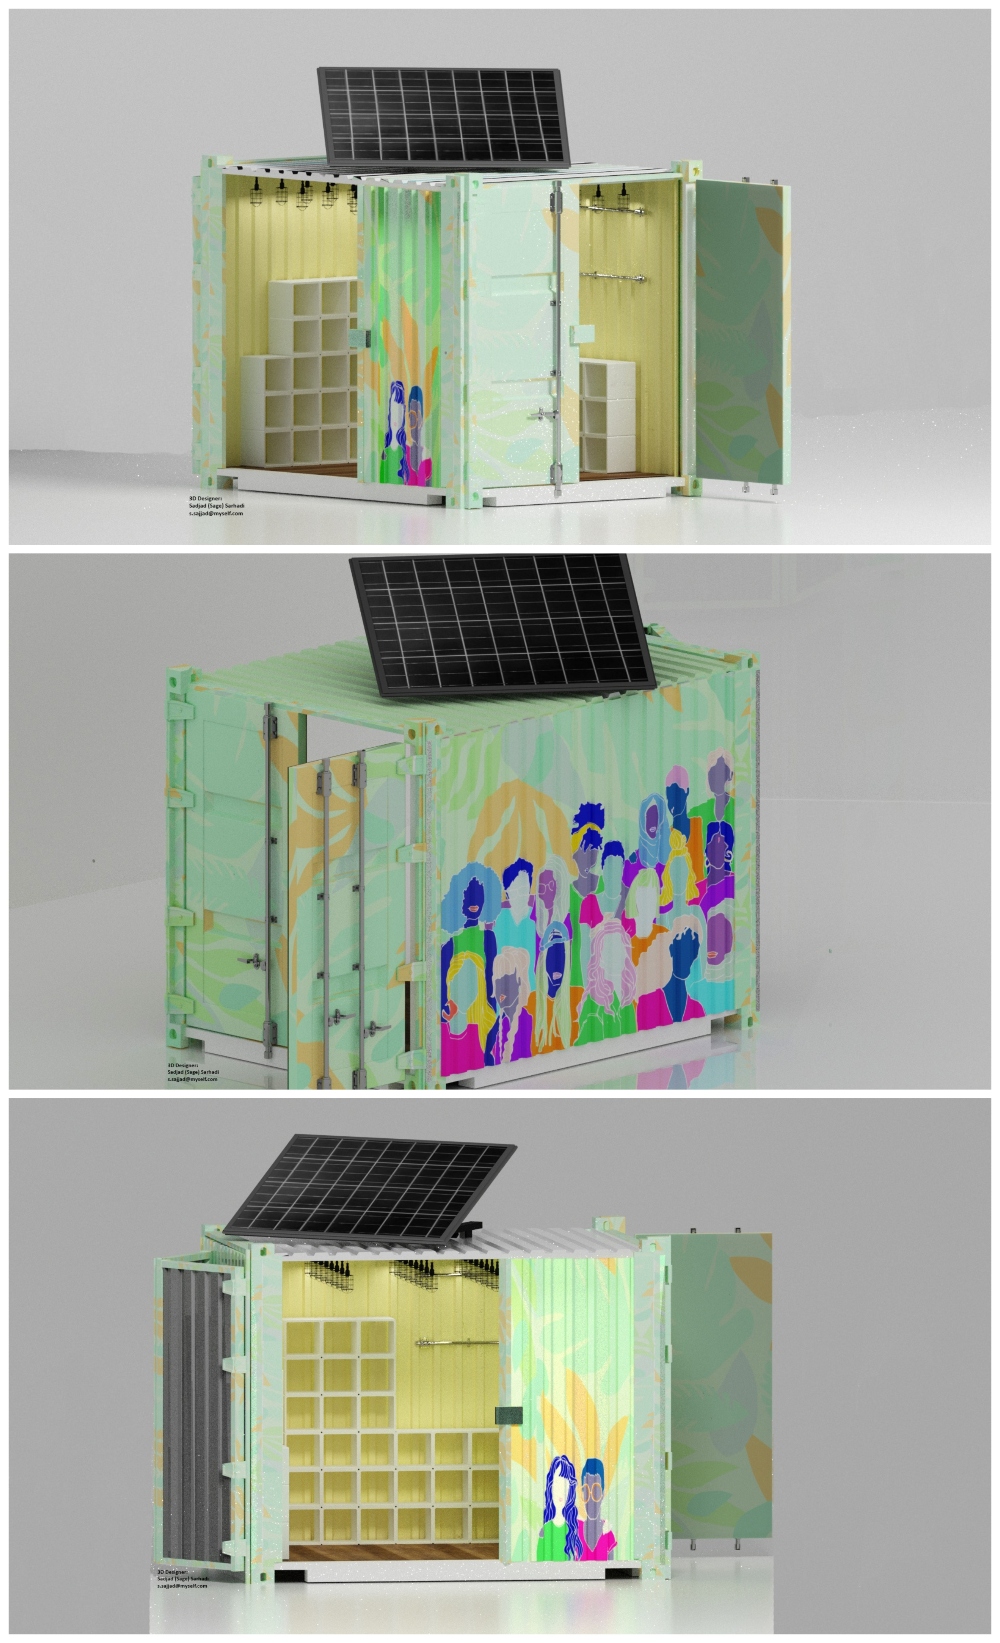 3D models of the Business of The Box container designed by Pourkeveh, Sarhadi and Haghshenas.